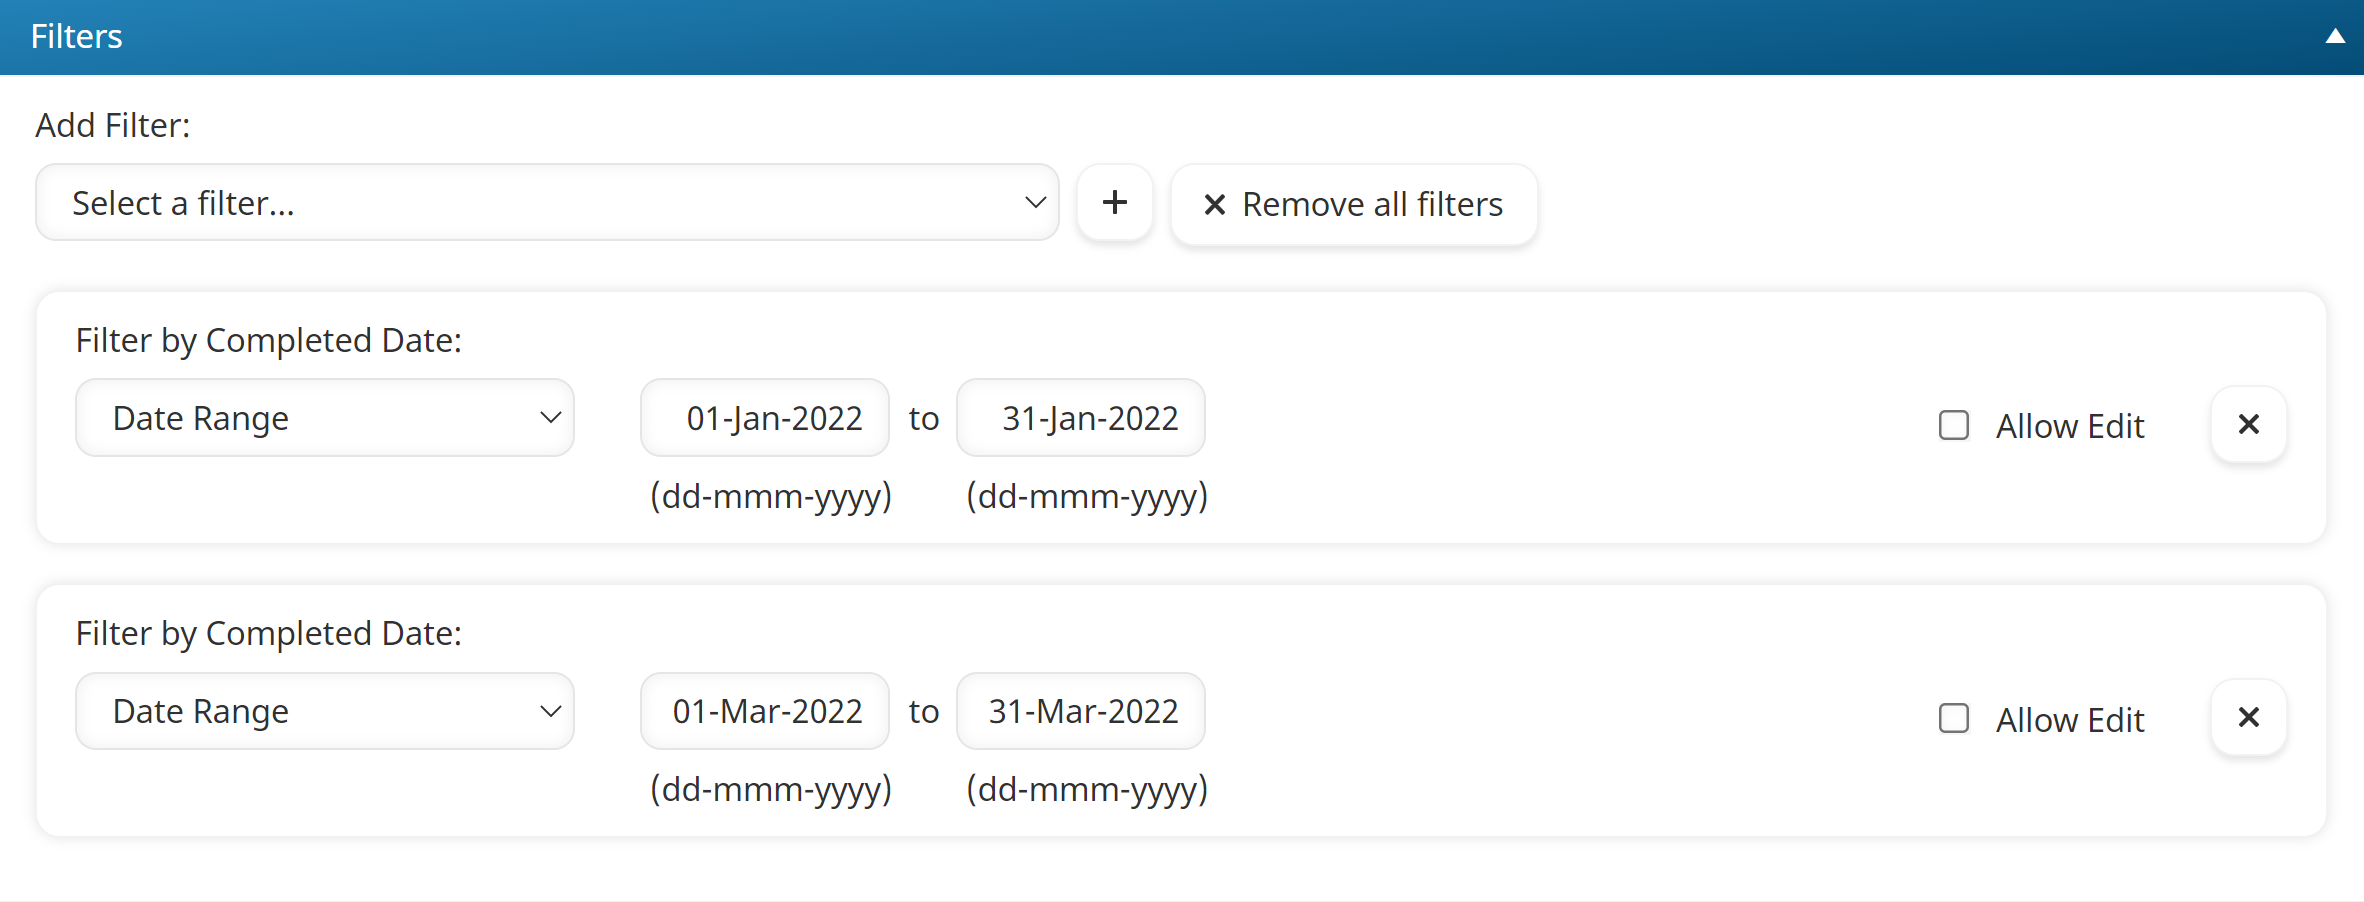 Filters - Multiple Filters on Completed Date 20220302